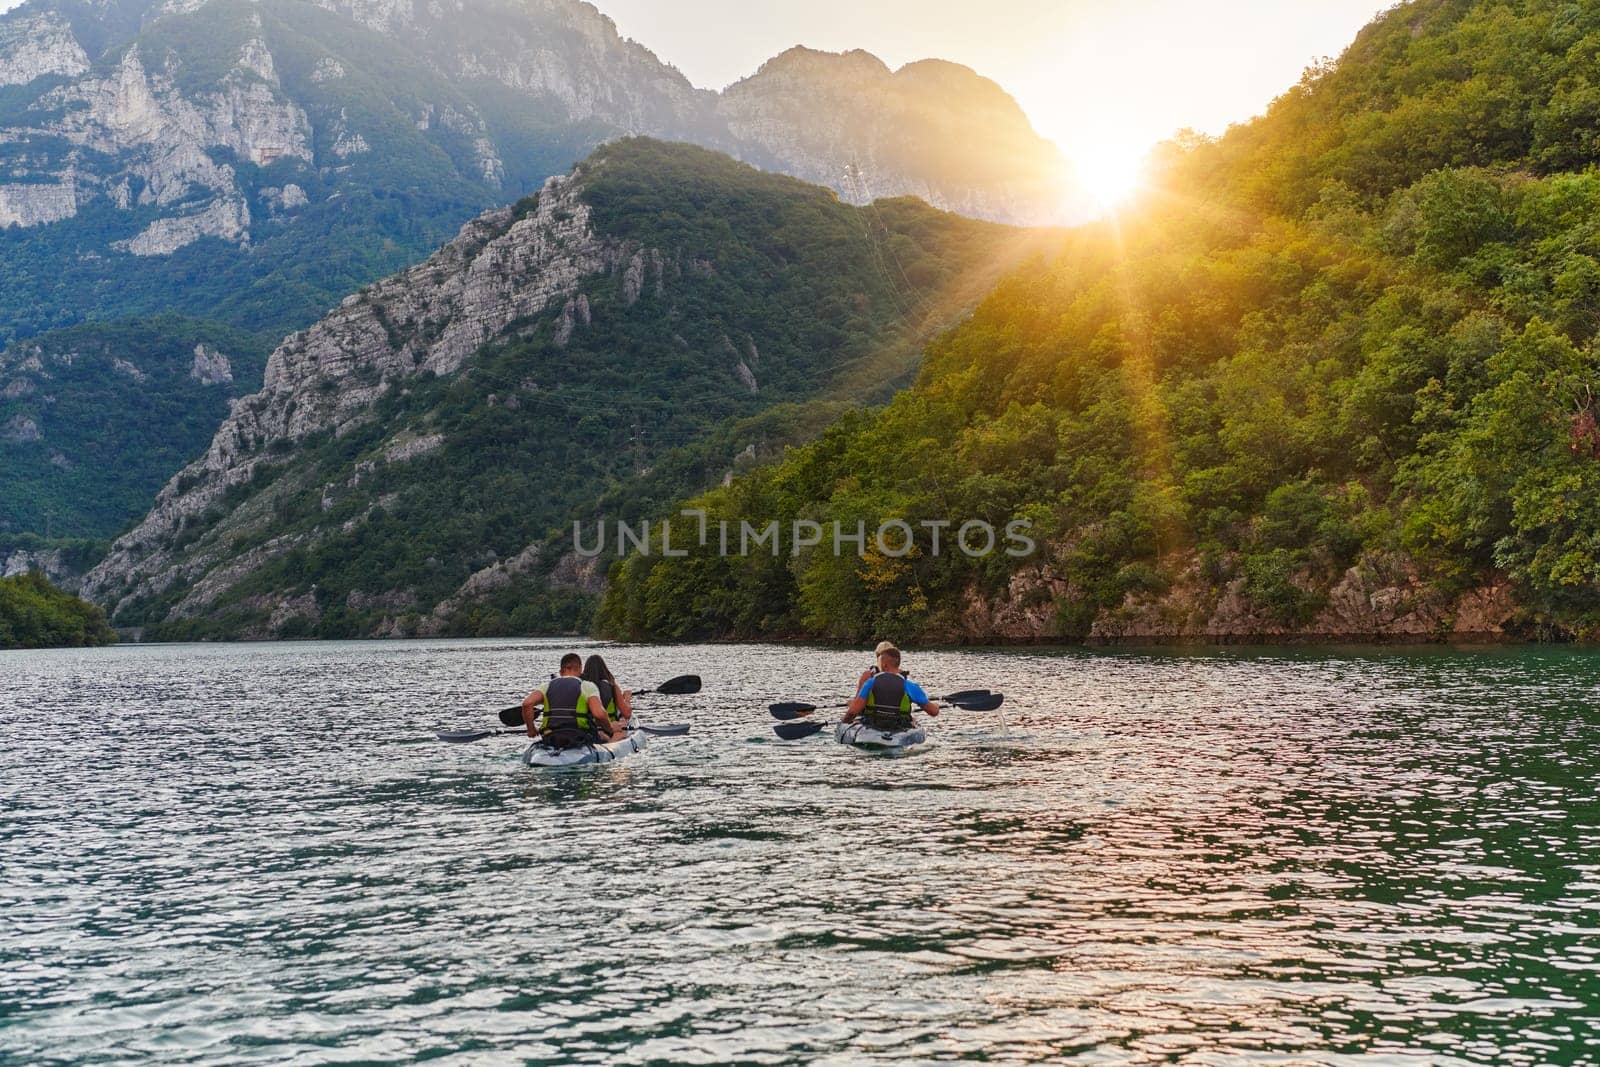 A group of friends enjoying fun and kayaking exploring the calm river, surrounding forest and large natural river canyons during an idyllic sunset